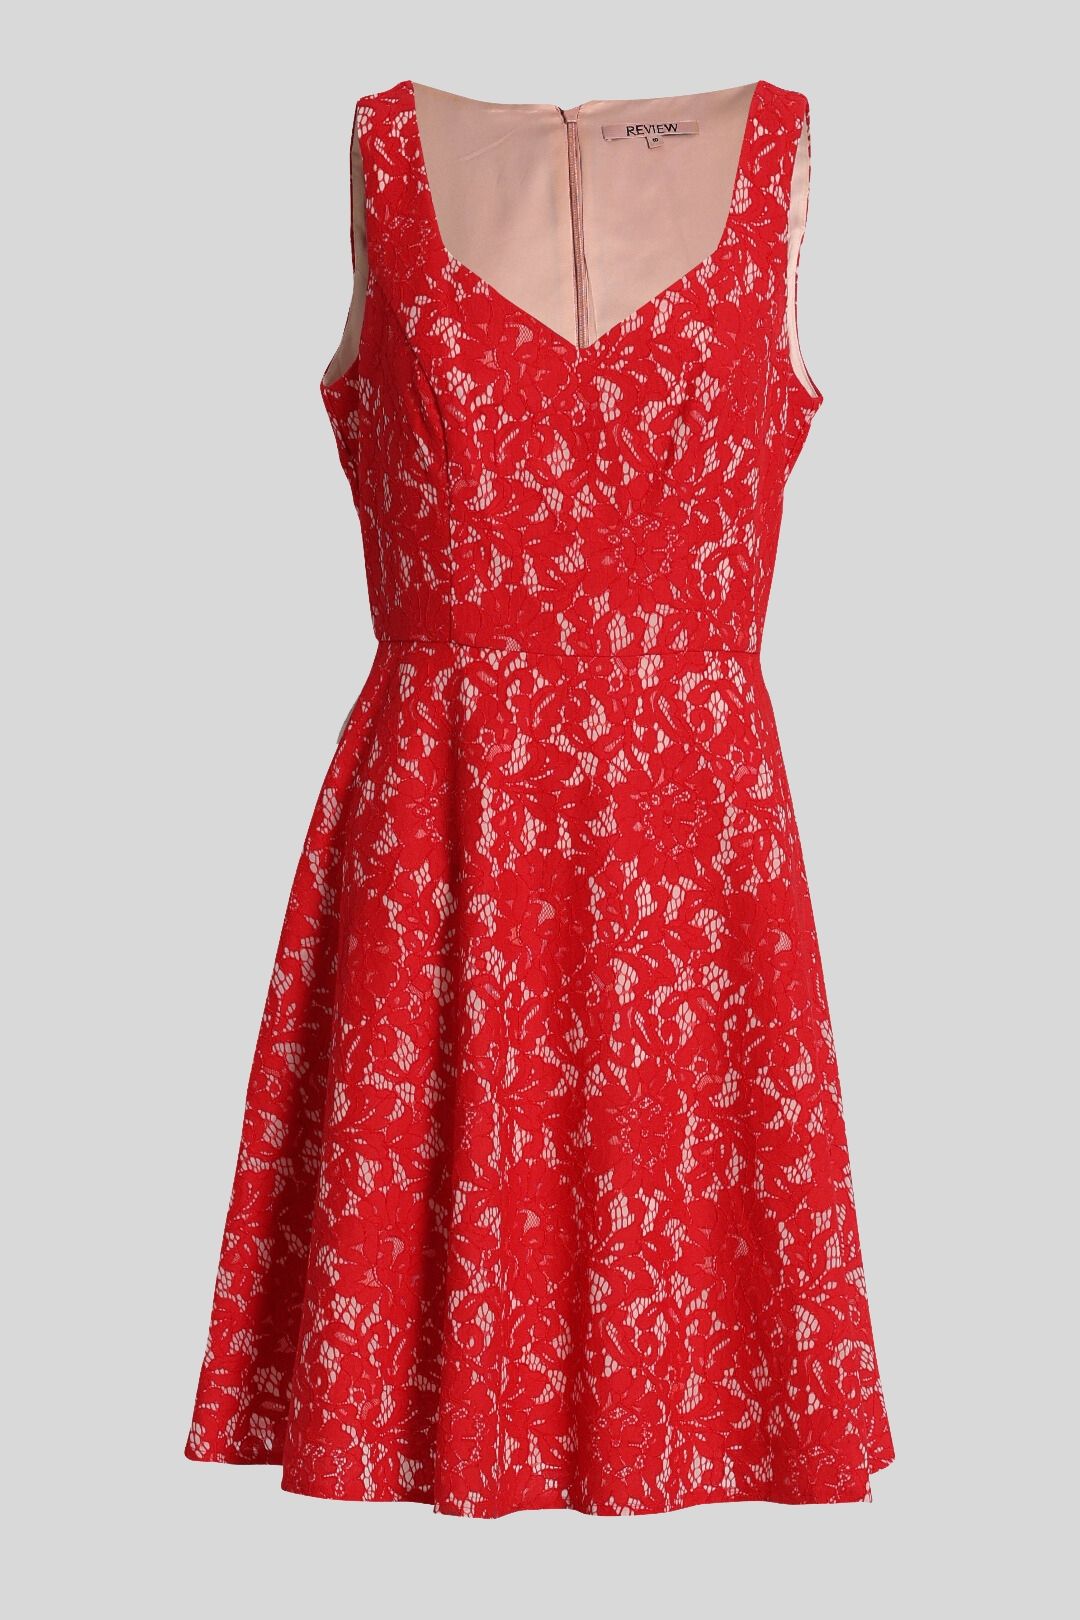 Buy High Tea Floral Lace Dress in Red, Review